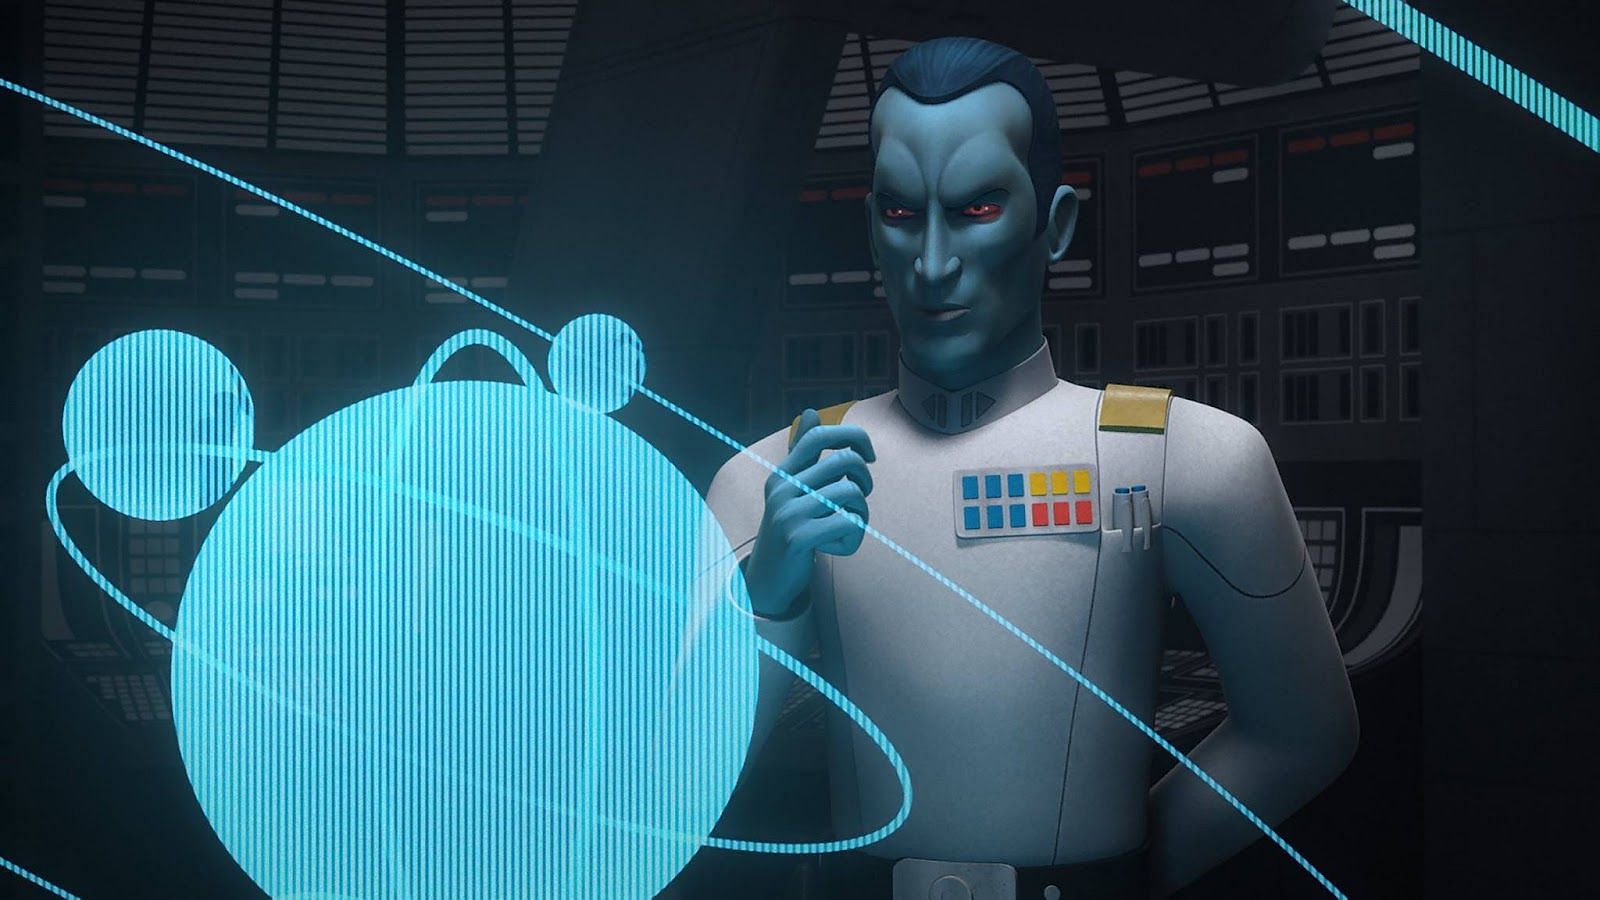 How was Star Wars Rebels received?